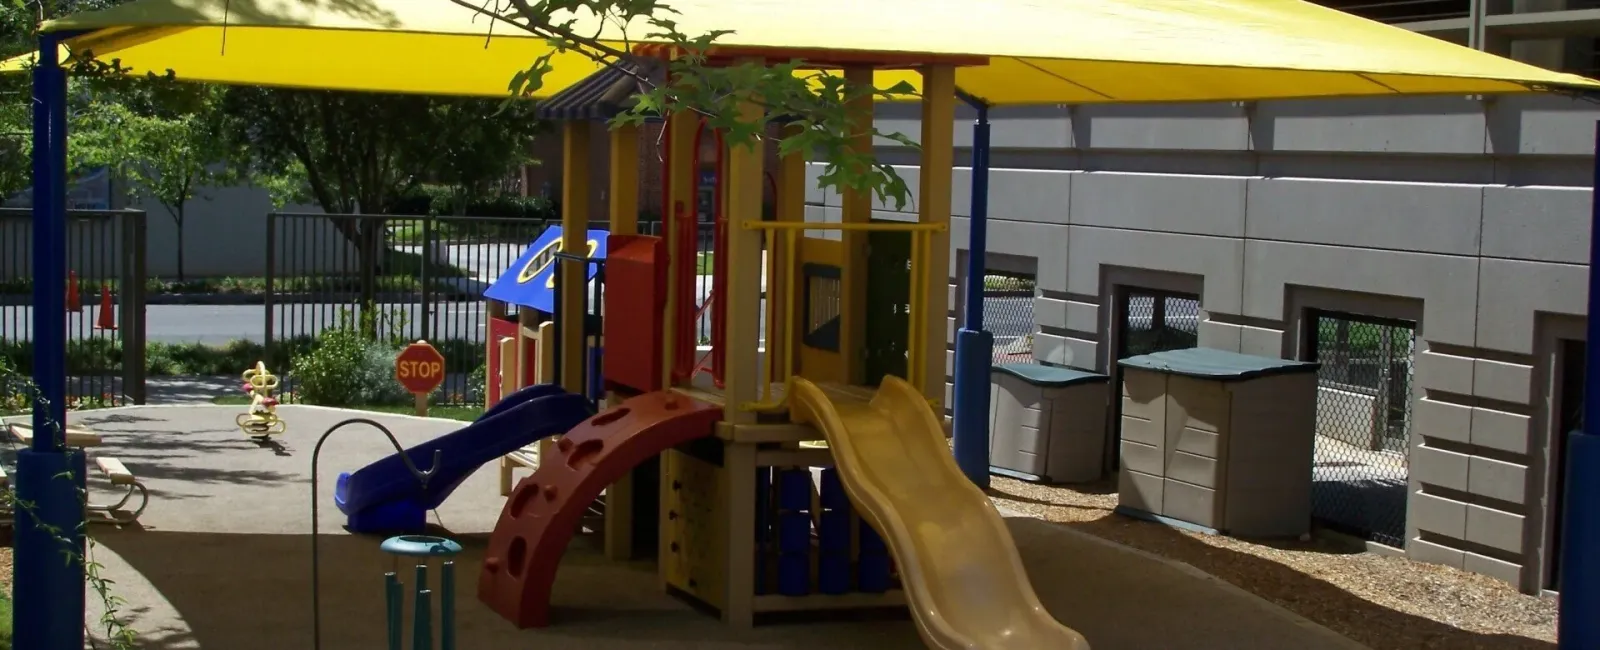 a play set outside a building